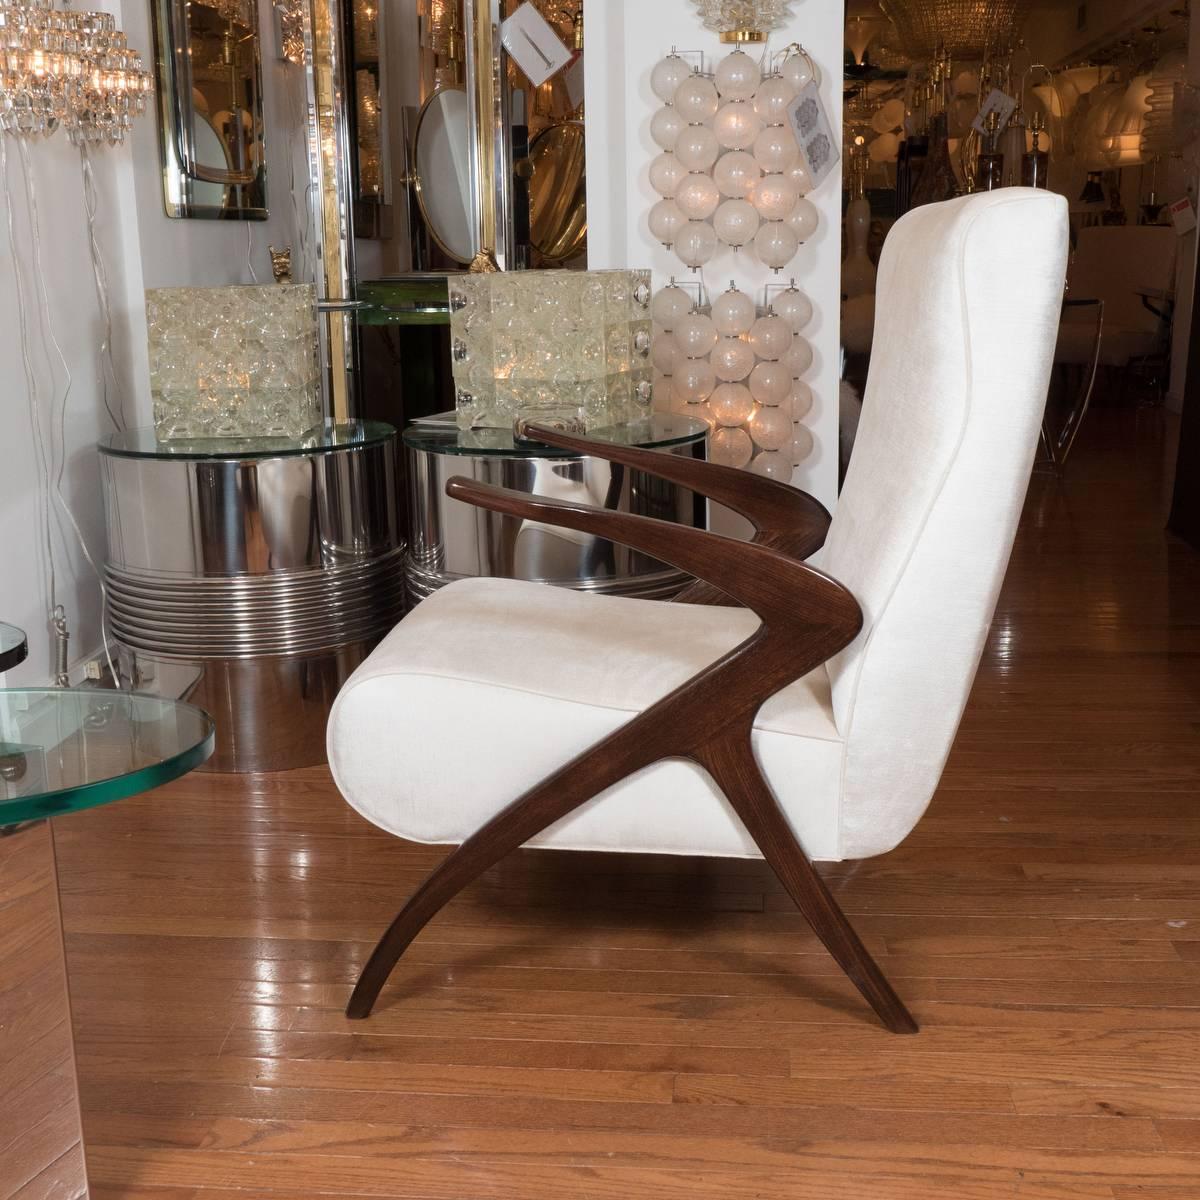 Pair of highly stylized armchairs with mahogany finish and angular design.